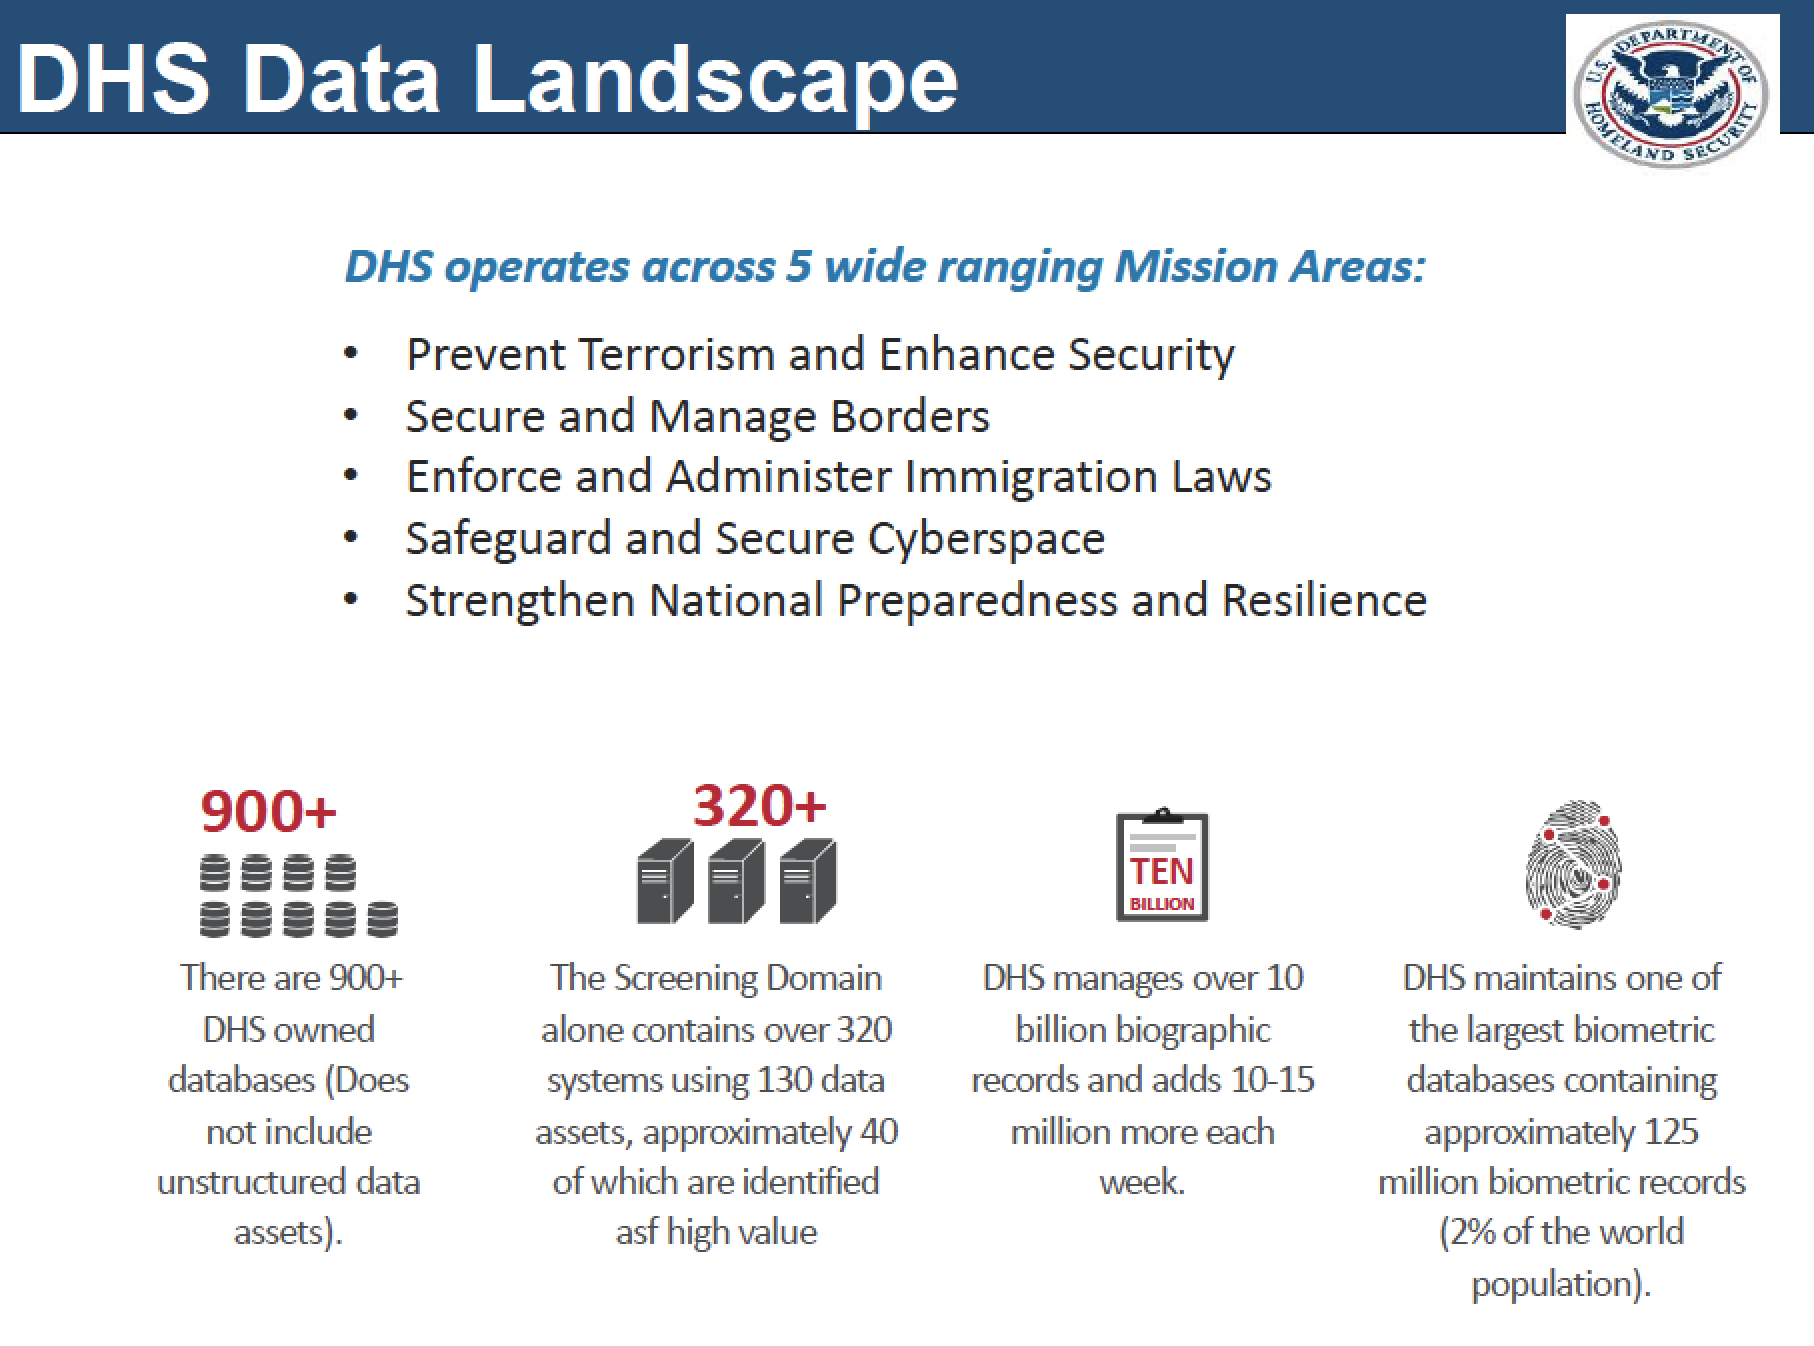 DHS slide showing breadth of DHS biometric and biographic data